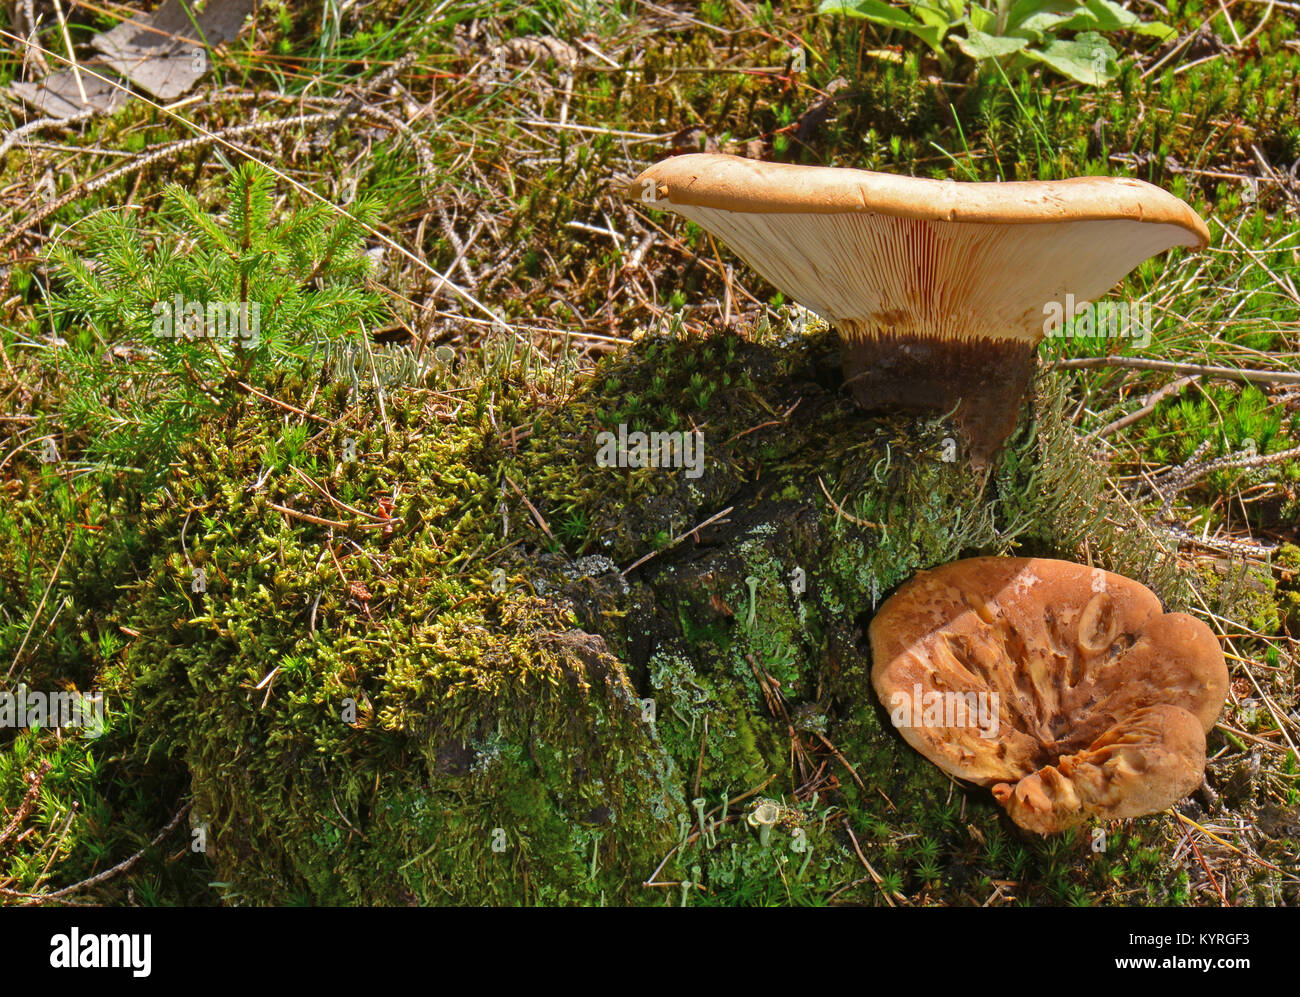 Velvet Roll-rim, Velvet-footed pax (Tapinella atrotomentosa), a inedible saprobic fungus growing on tree stumps of conifers in Europe and North America Stock Photo